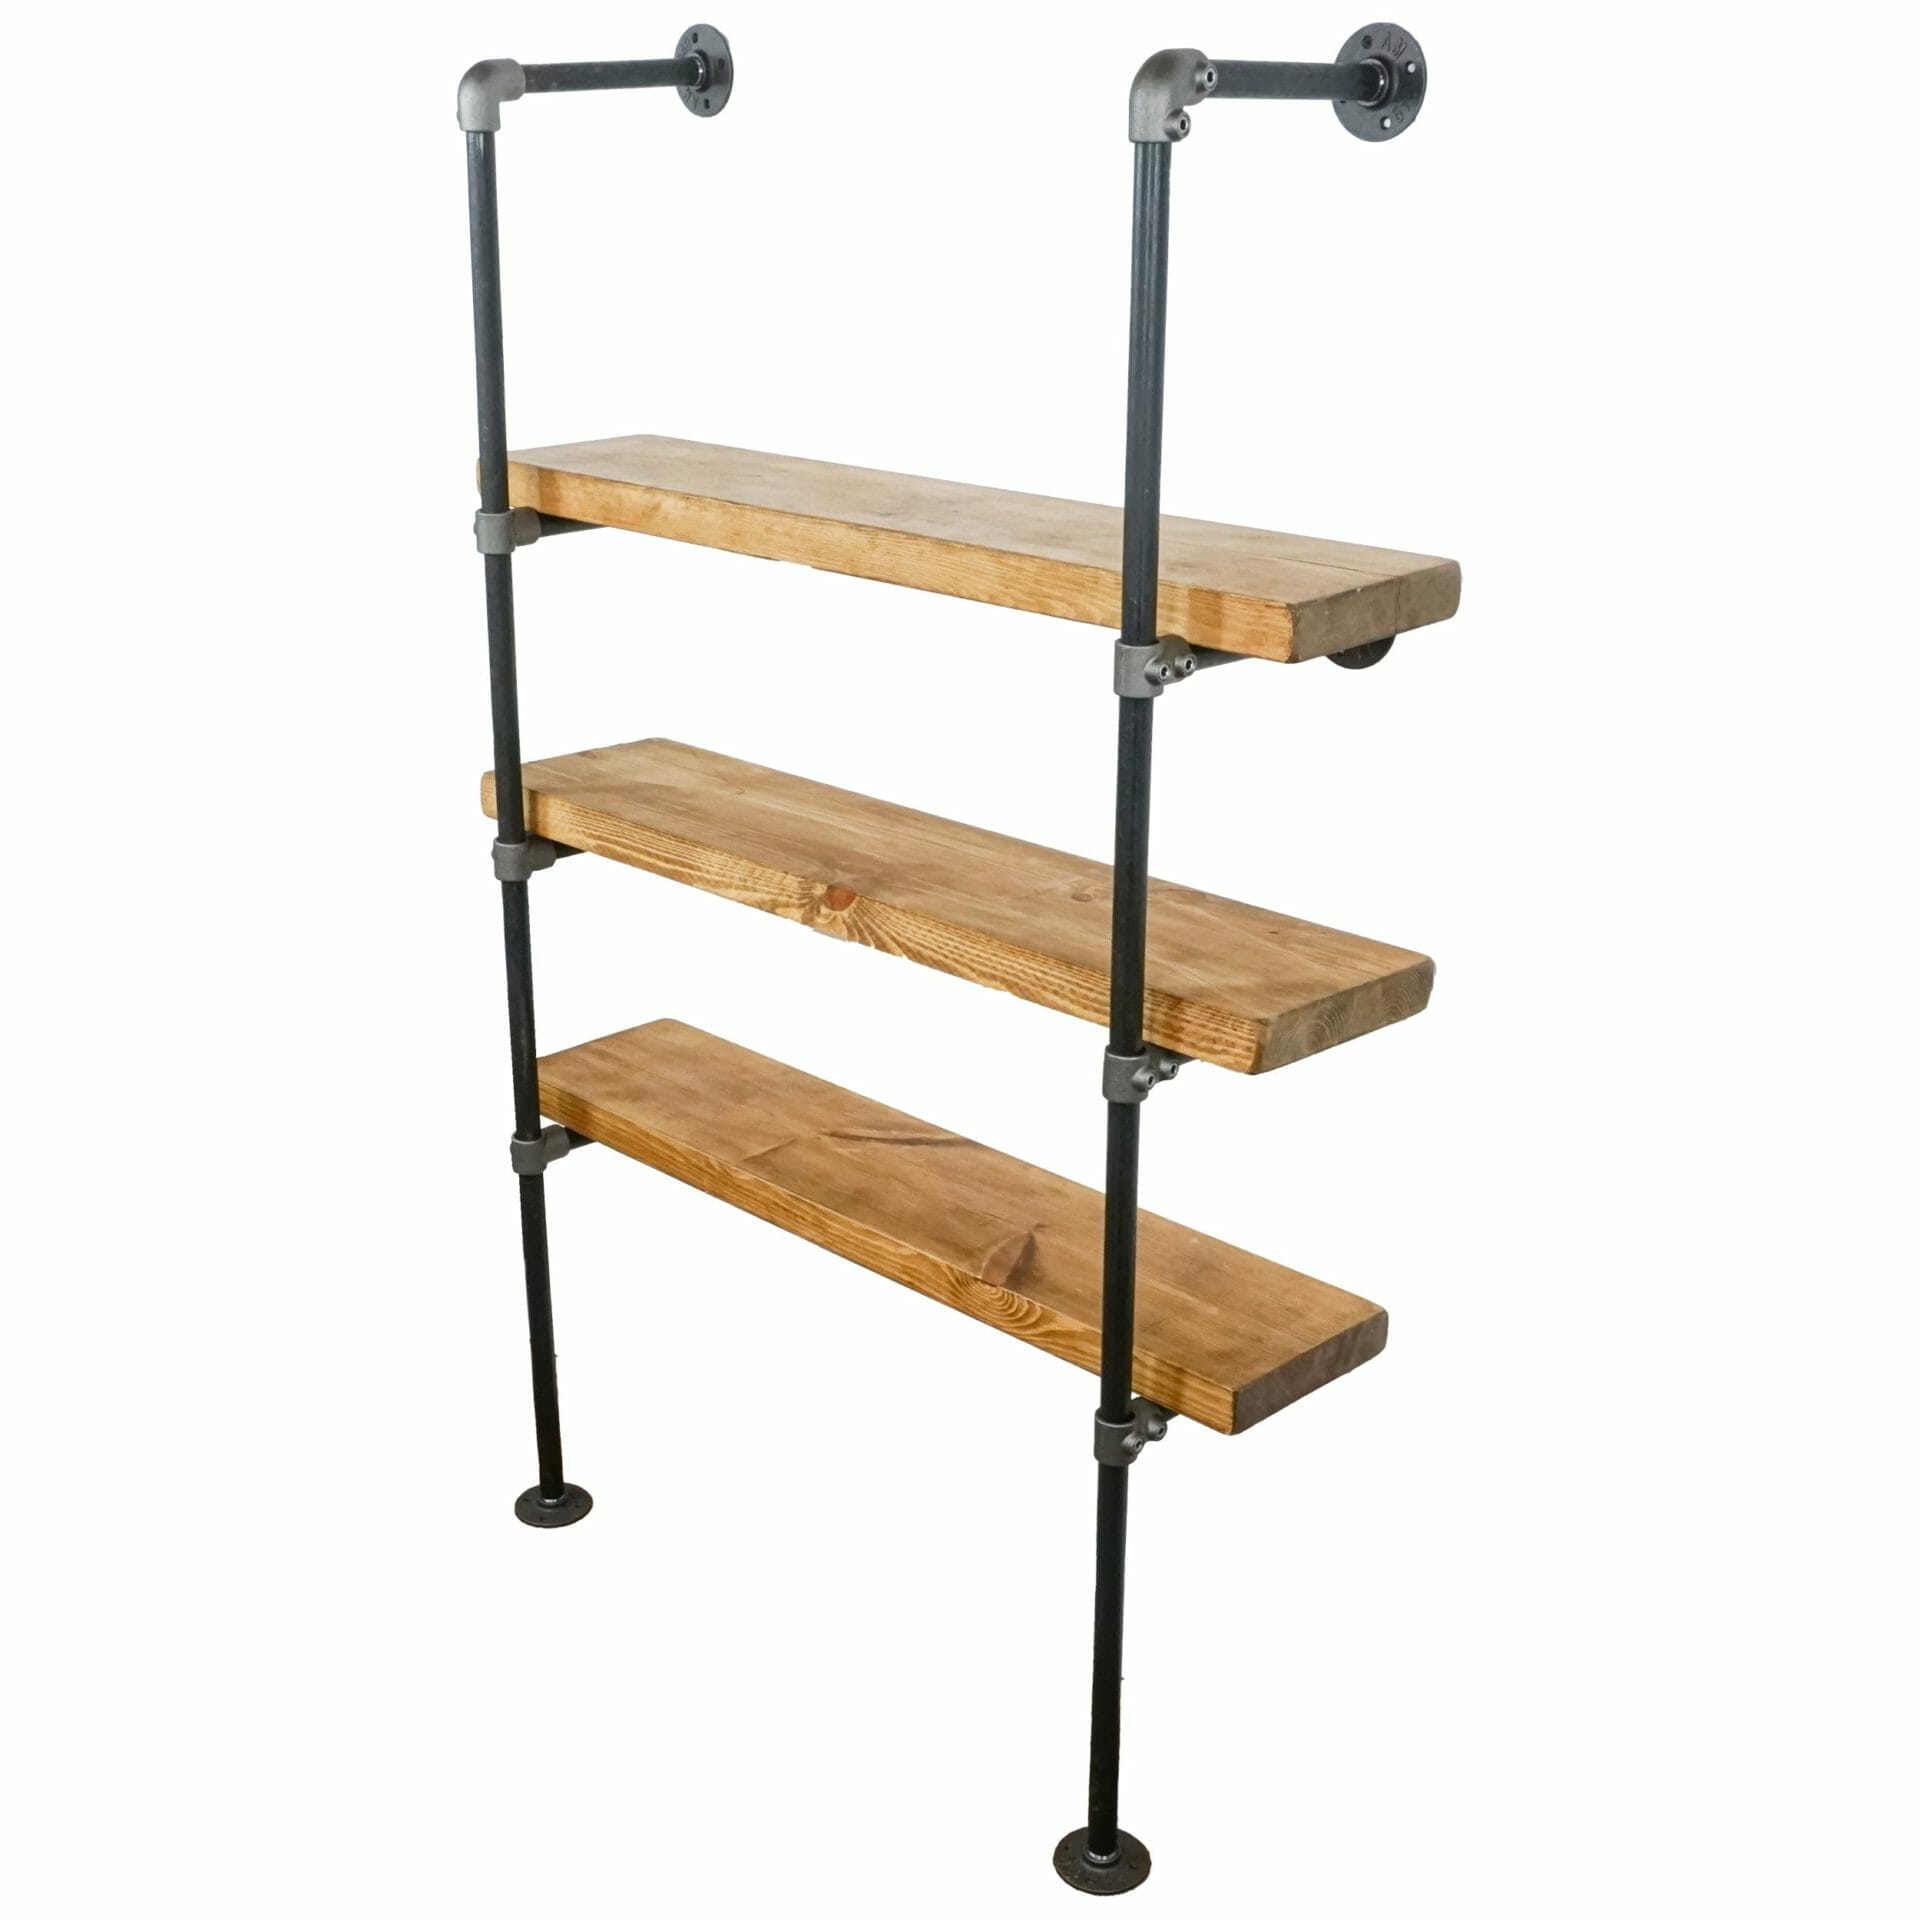 floor and wall mounted industrial storage unit wooden shelves